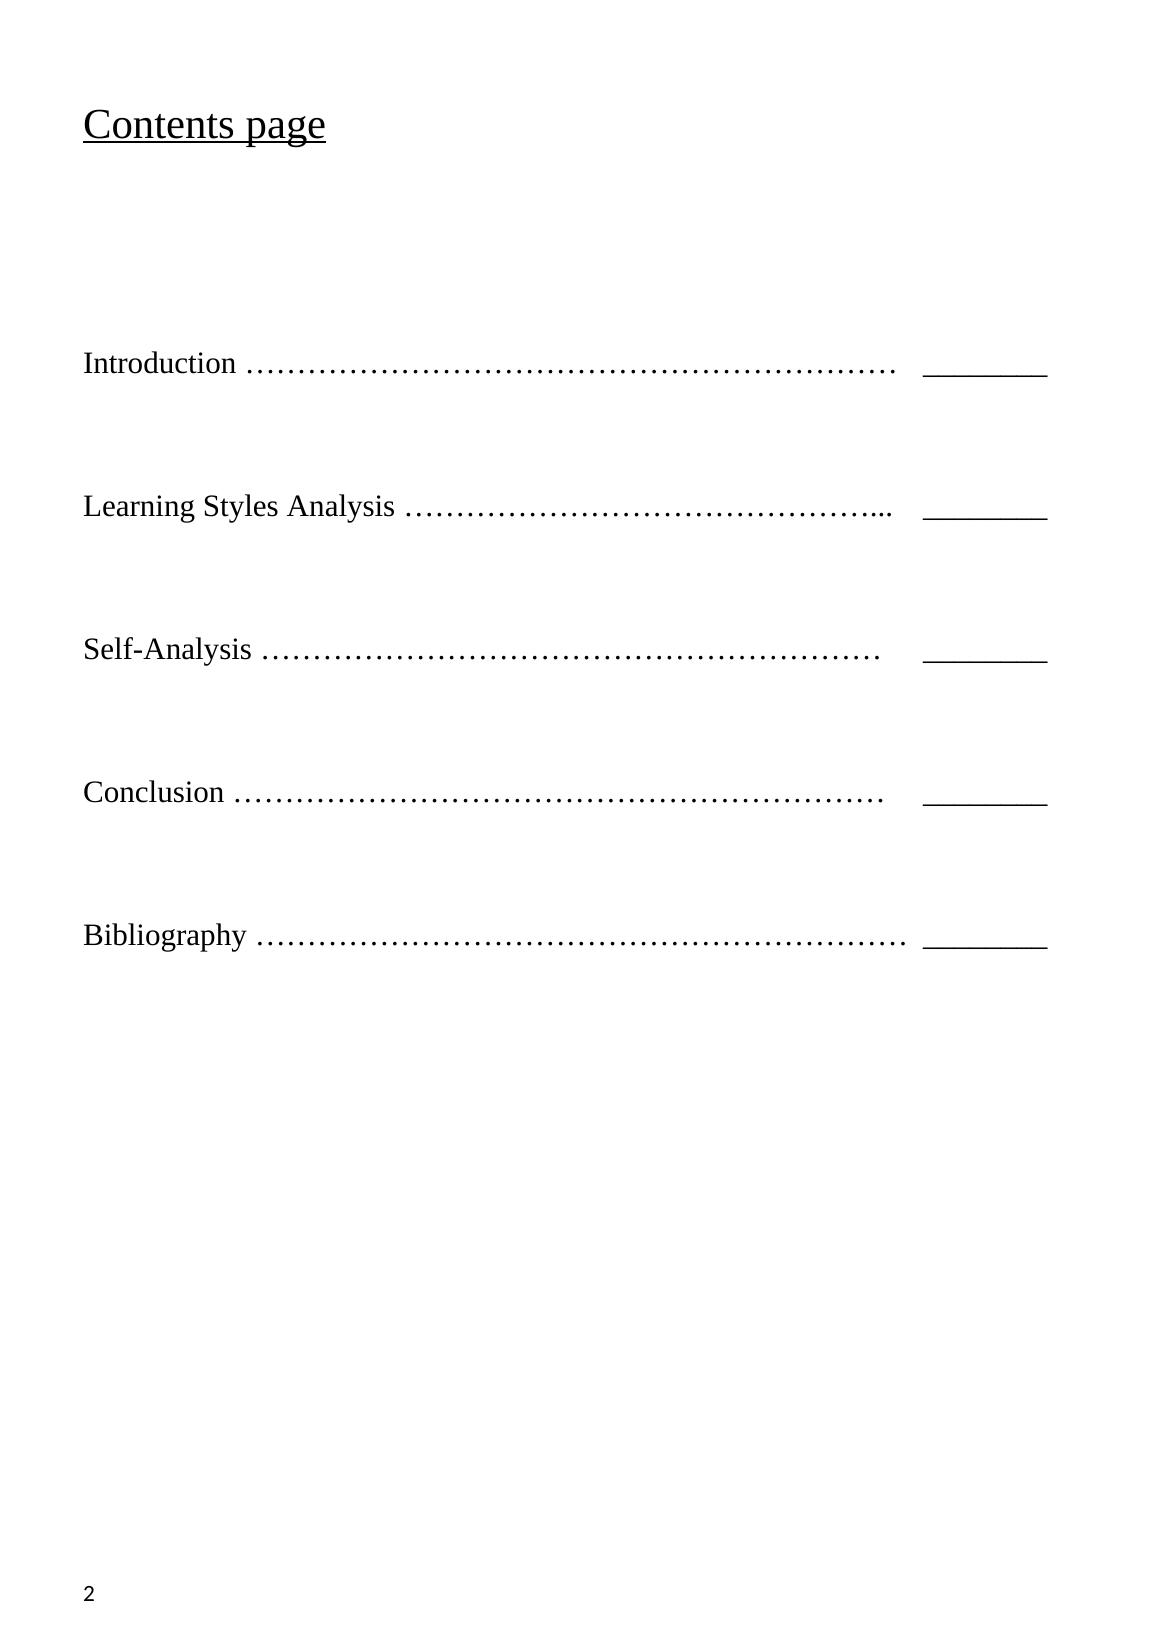 Learning Styles Analysis and Self-Analysis_2